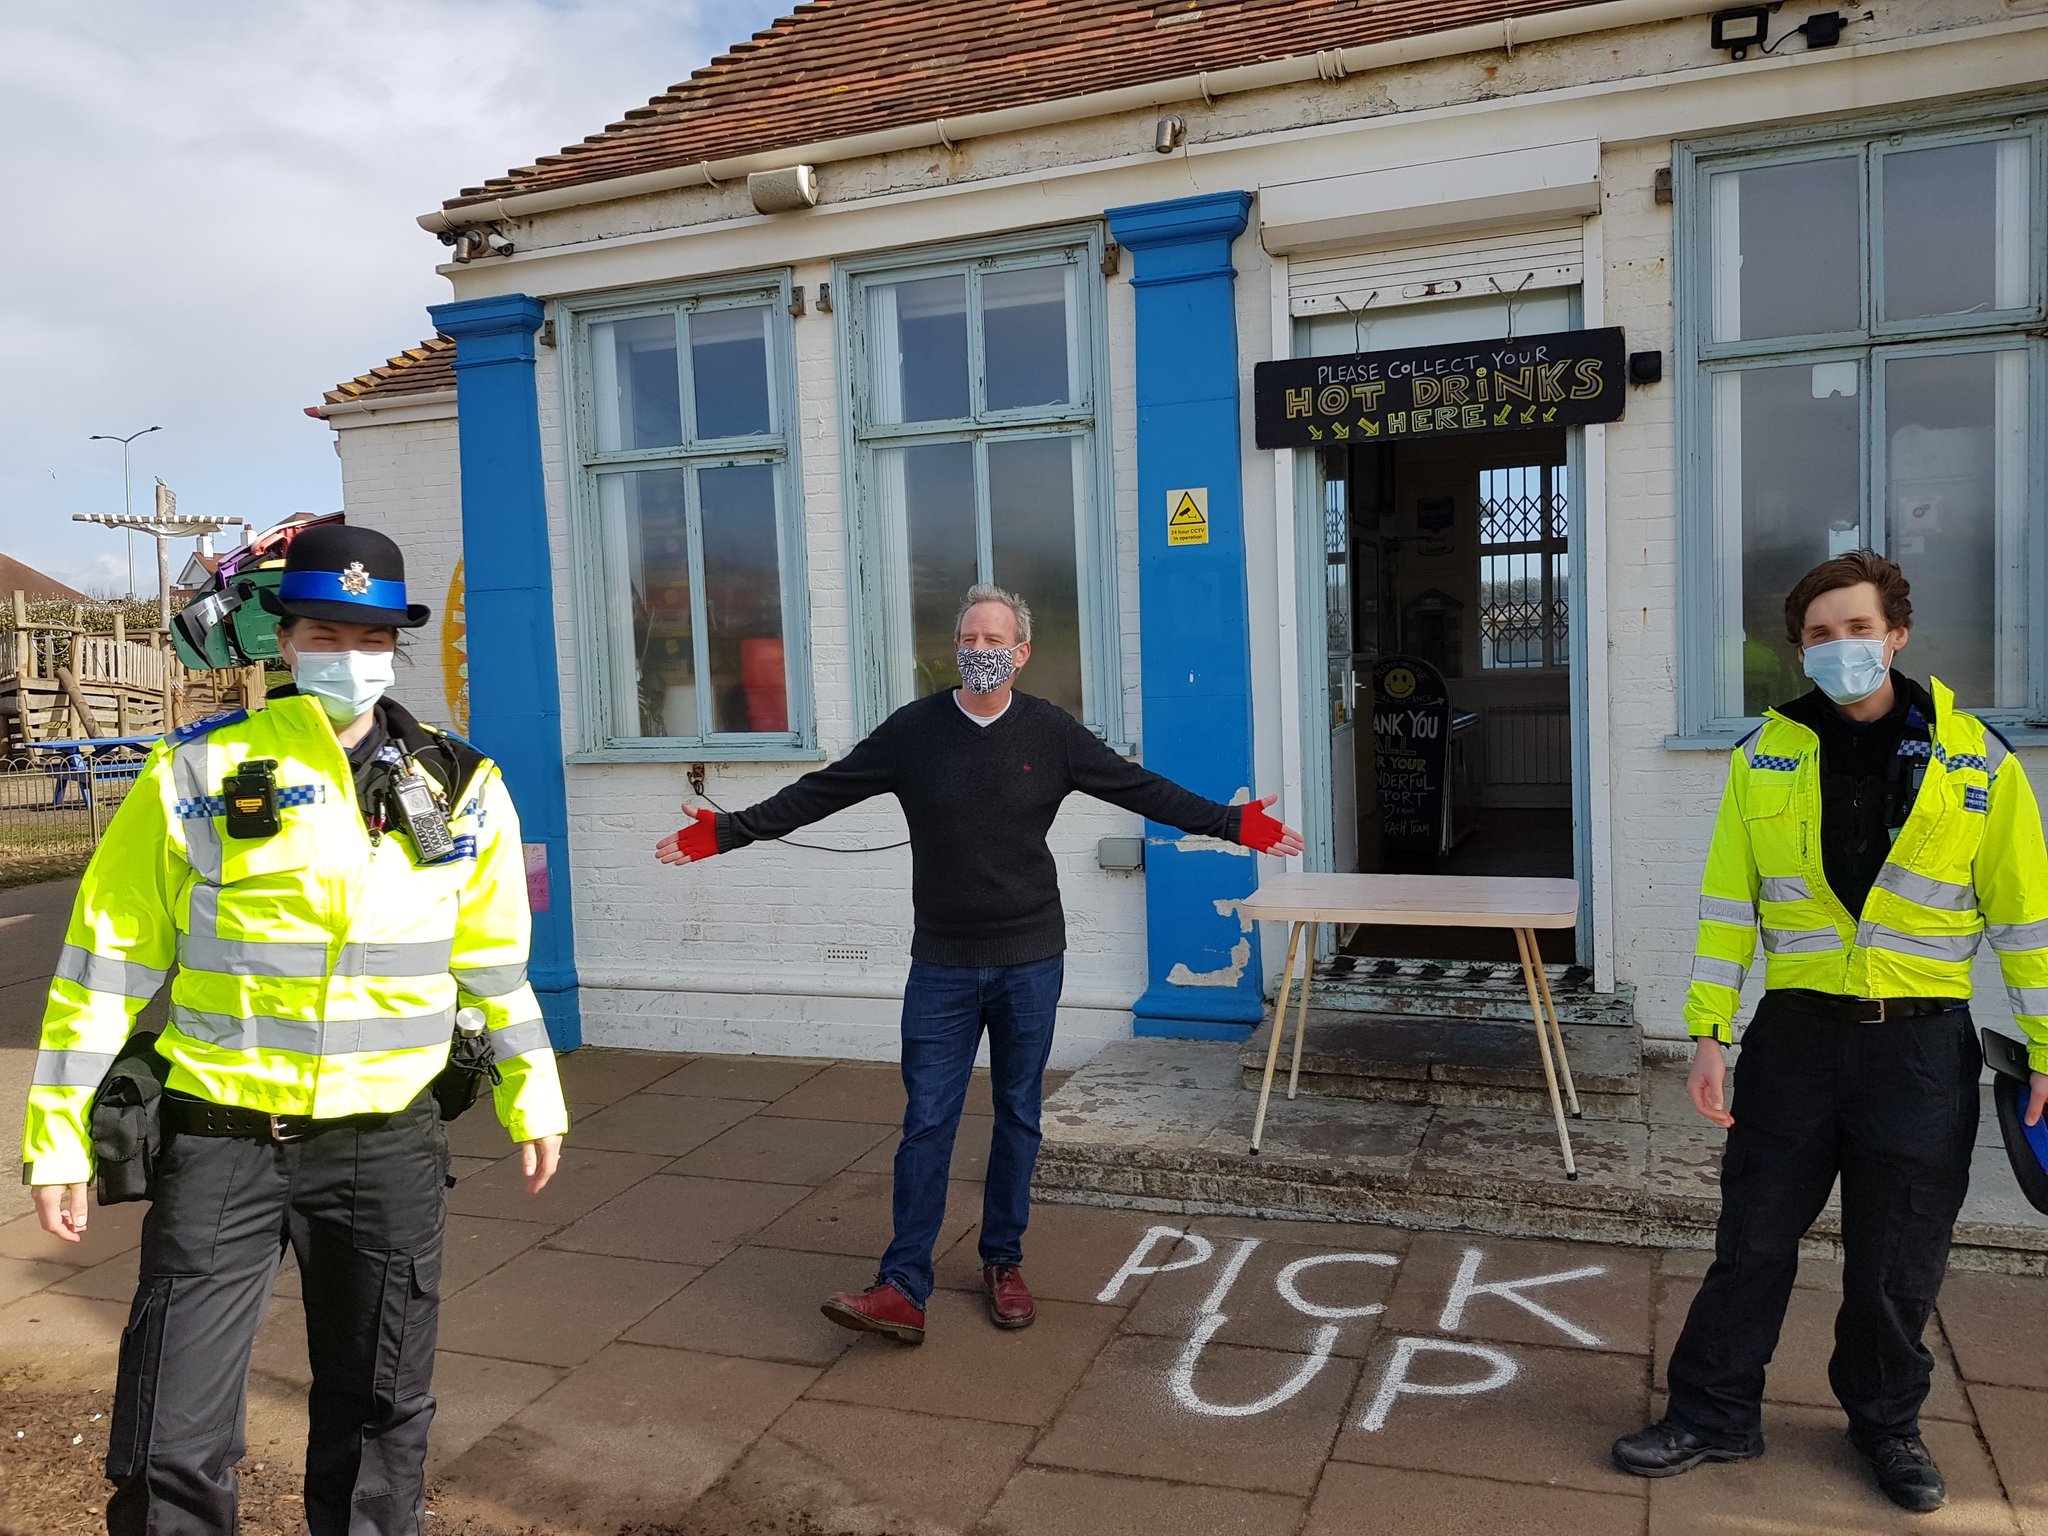 Police launched extra patrols at Hove Lagoon as business owners and members of the community raised concerns over increasing vandalism at the site over the last 12 months